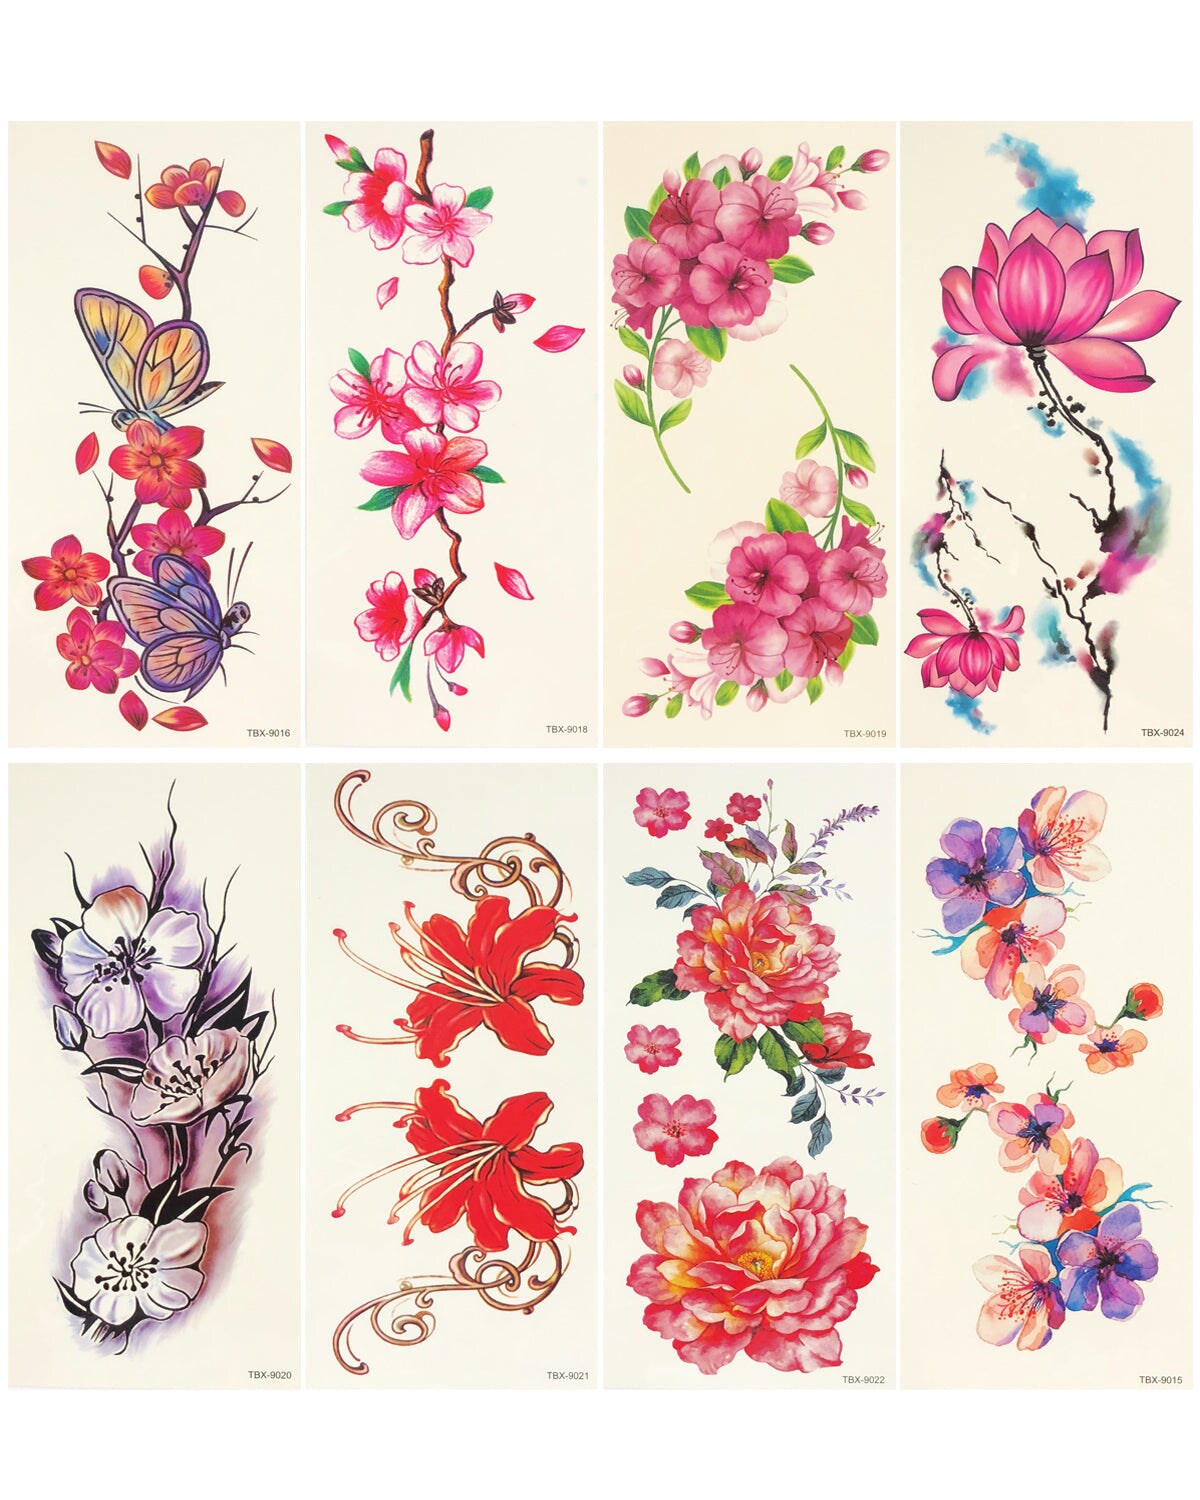 Wrapables Floral Temporary Tattoos Body Art Water Tattoos (8 Sheets), Pink Floral